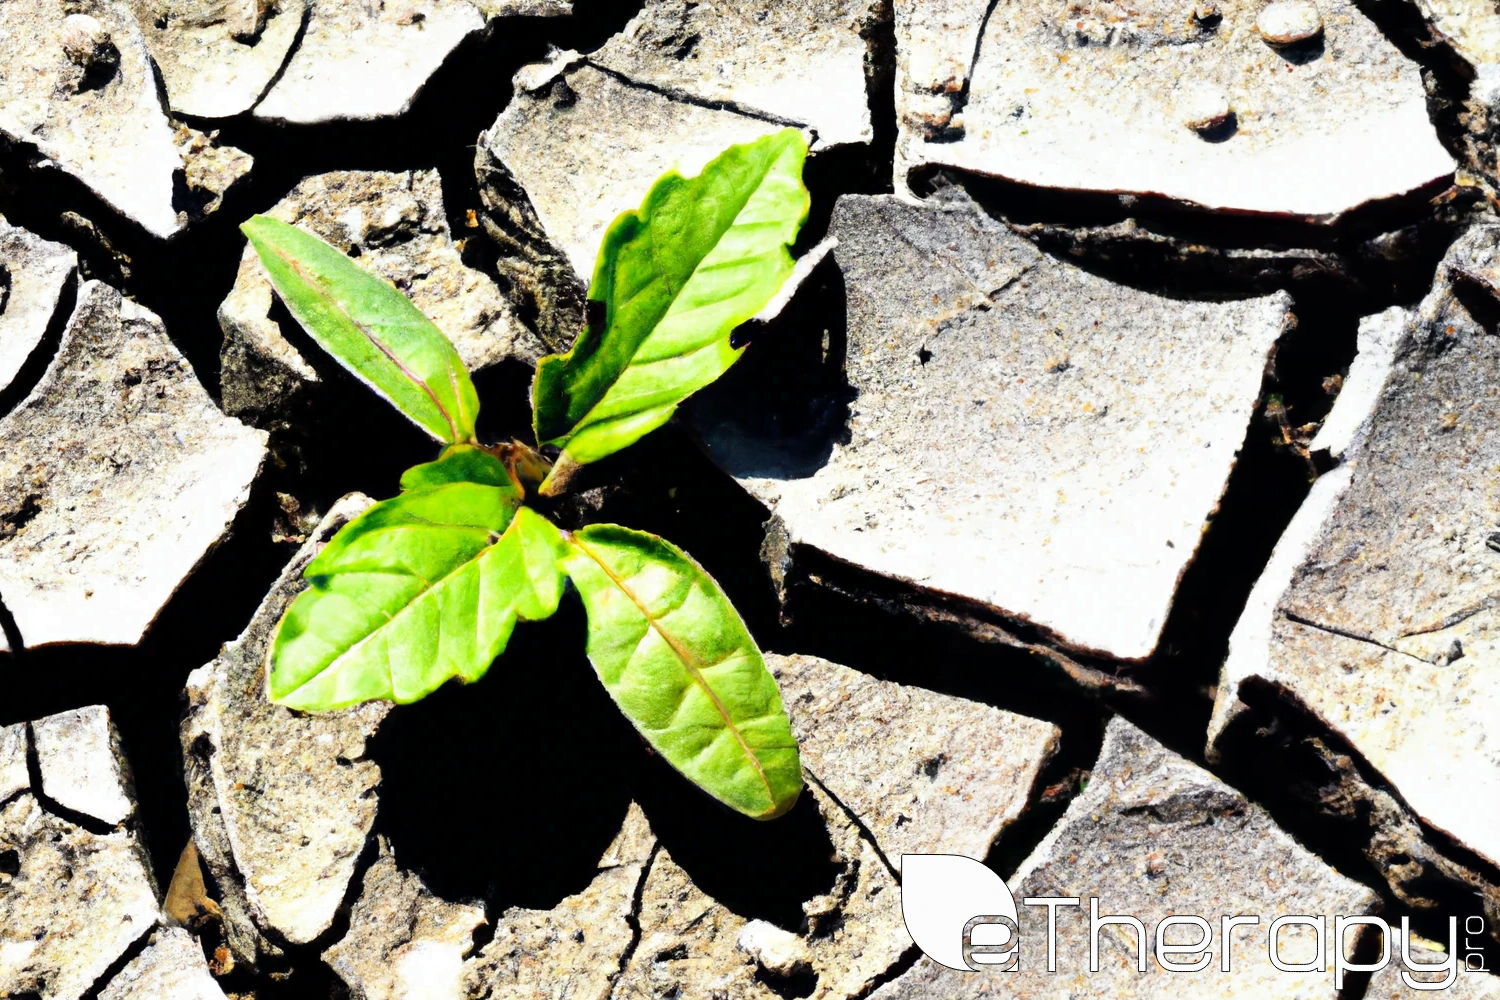 small plant emerging from dry land - transforming adversity into personal growth